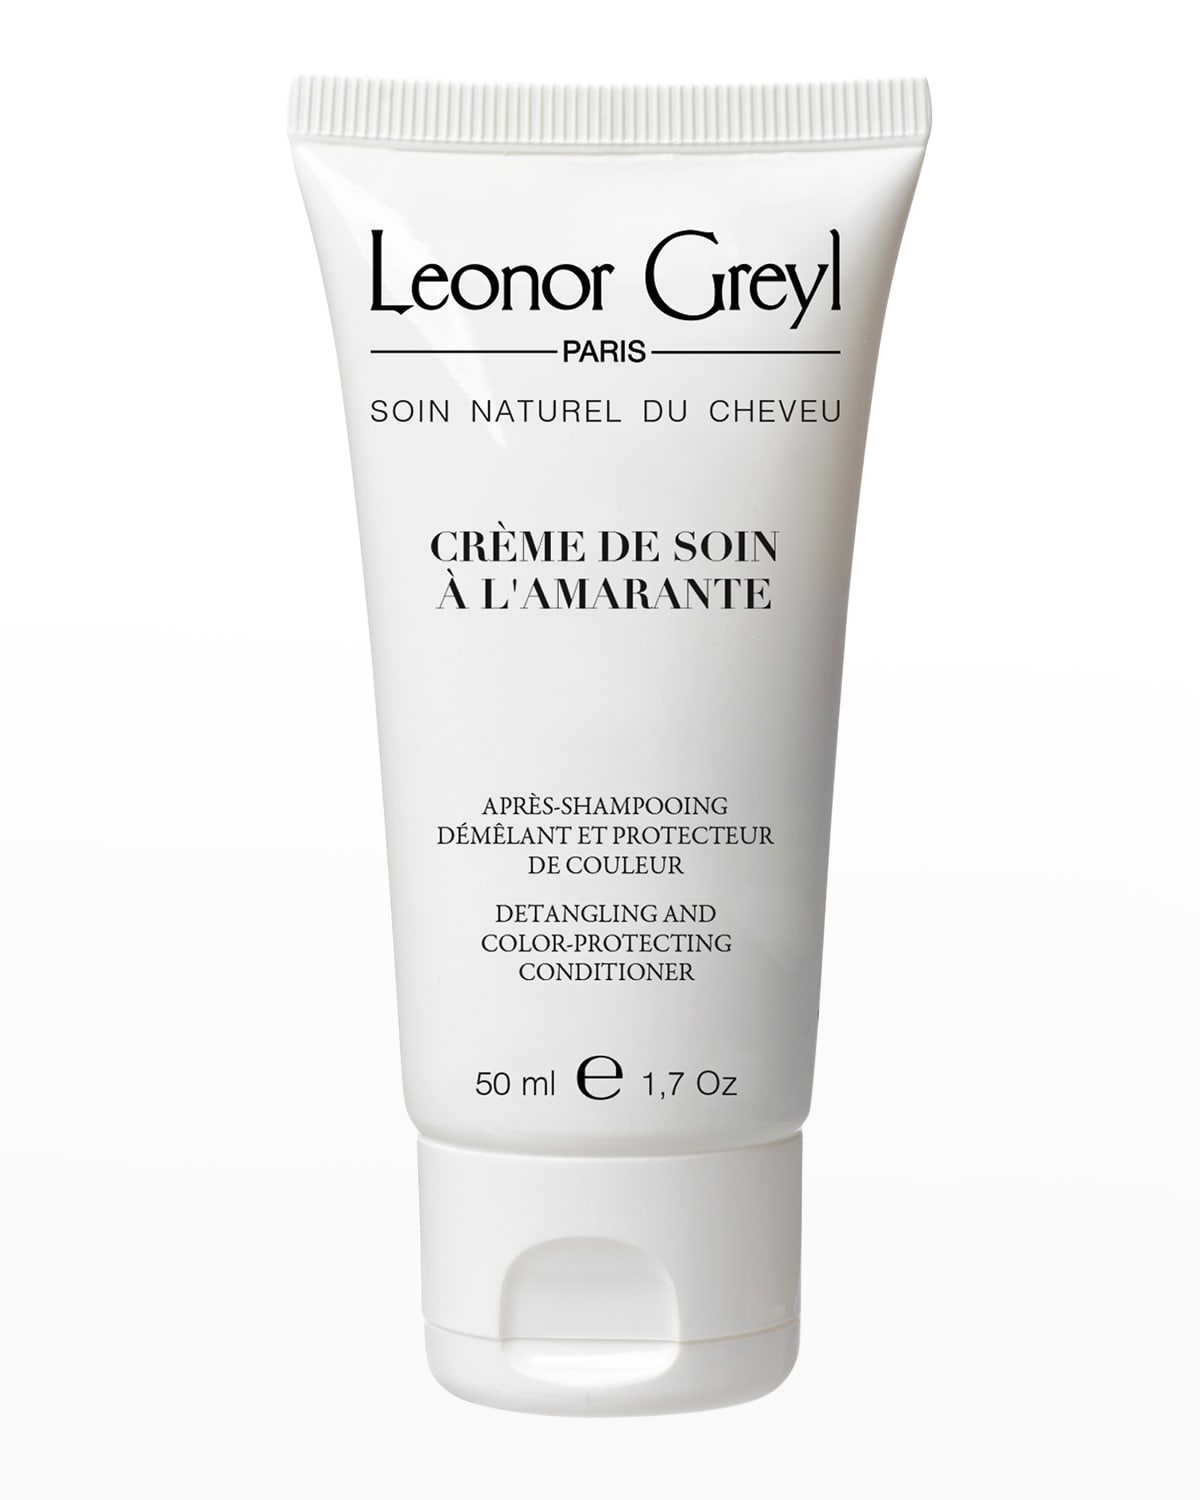 Travel Size Cr&egrave;me de Soin a l'Amarante, Yours with any $50 Leonor Greyl Purchase